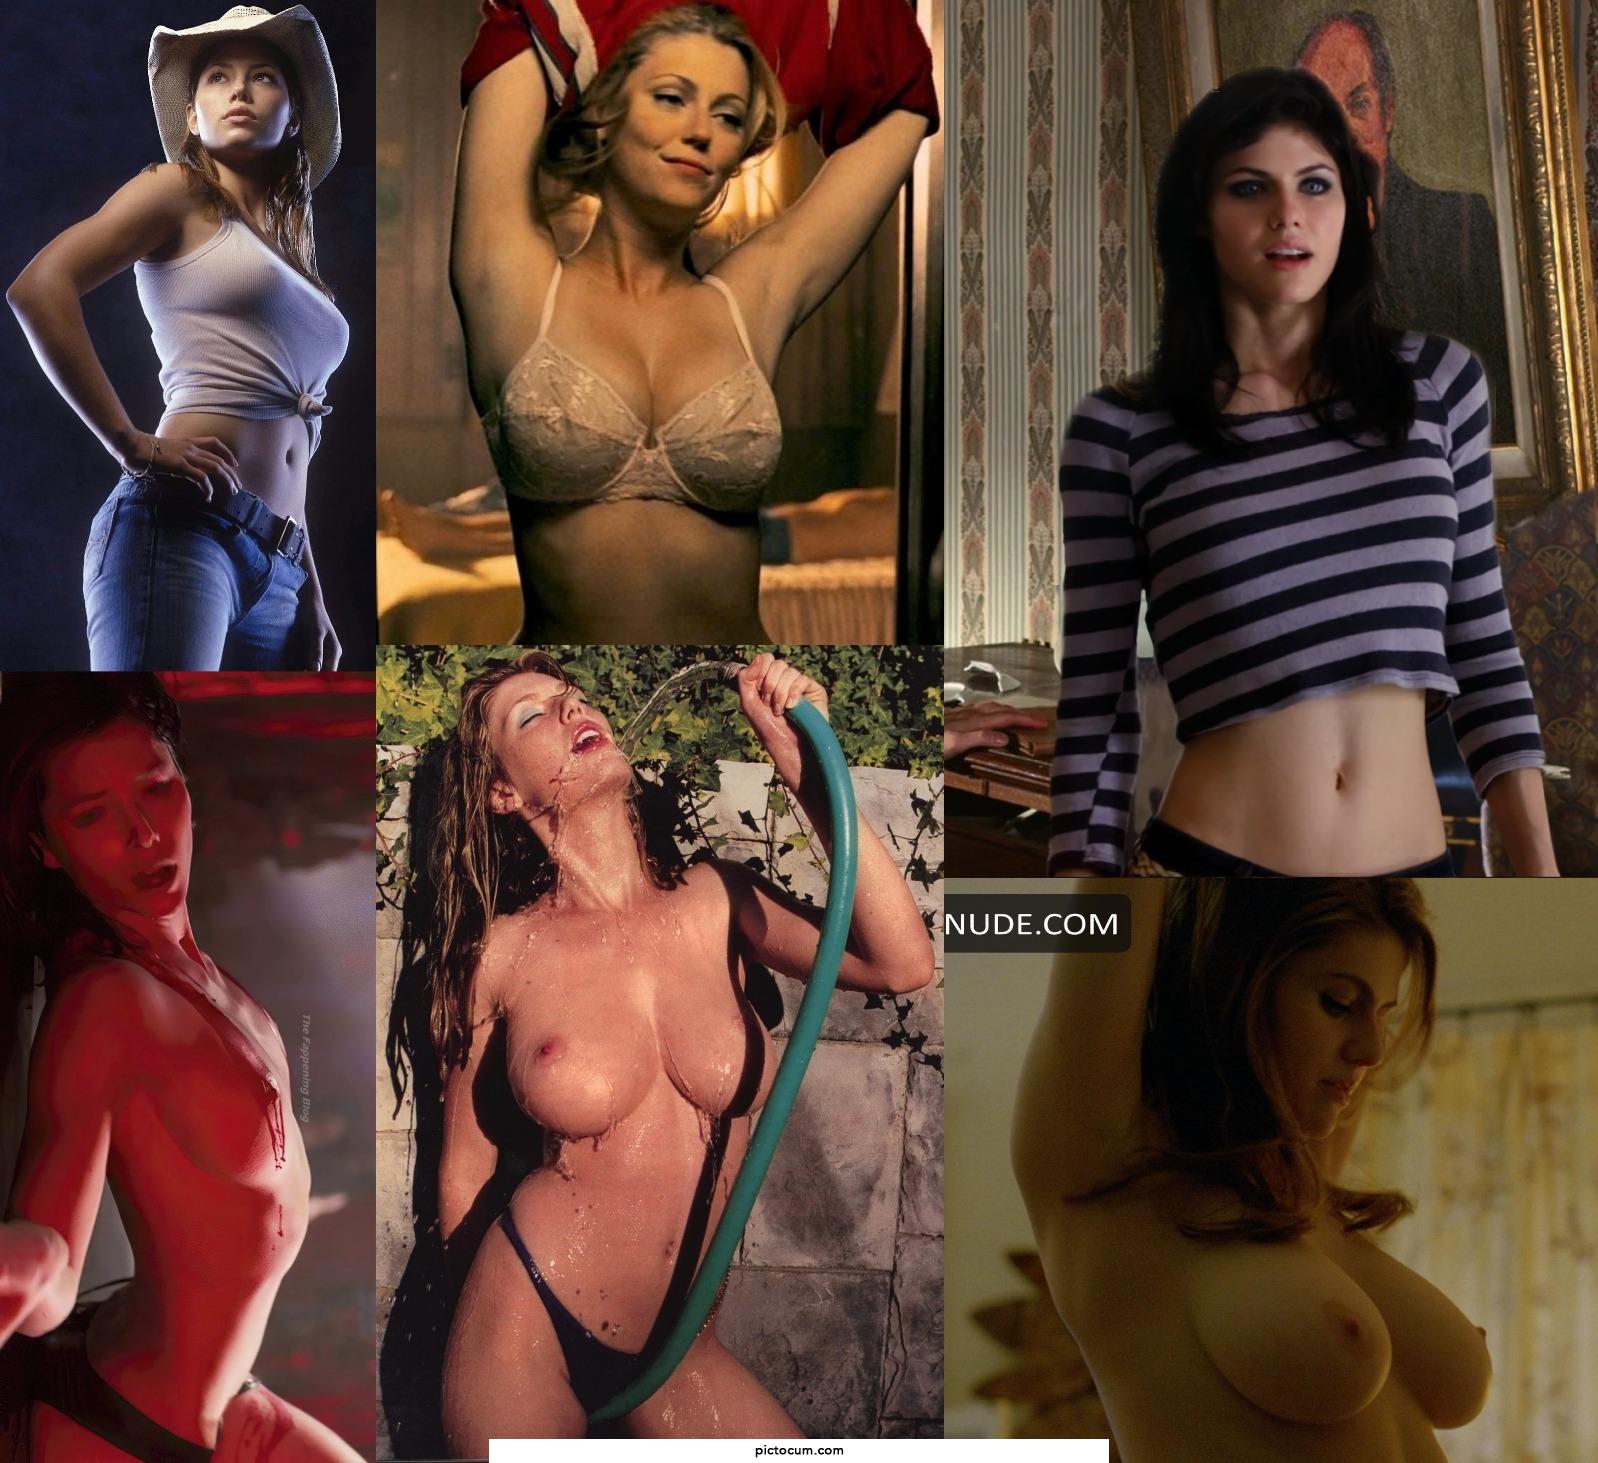 Who is your favorite Texas Chainsaw Girl?